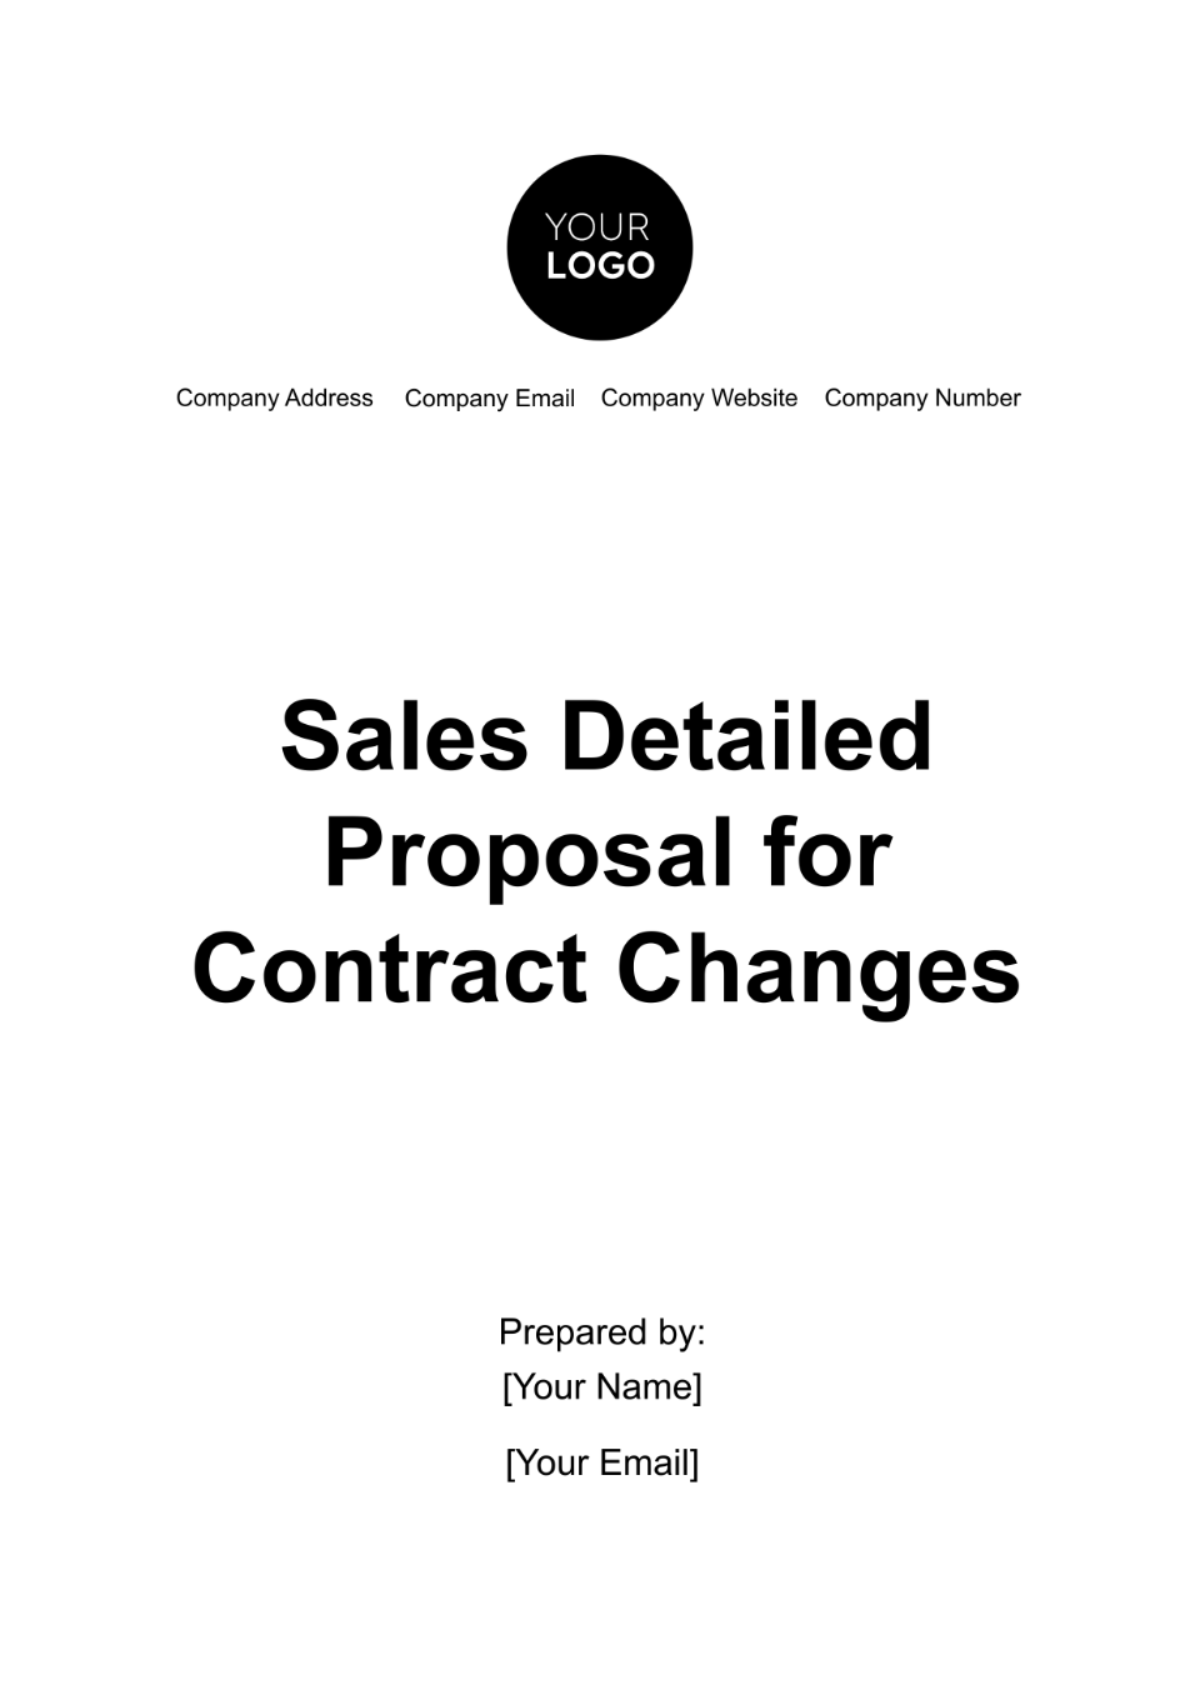 Free Sales Detailed Proposal for Contract Changes Template